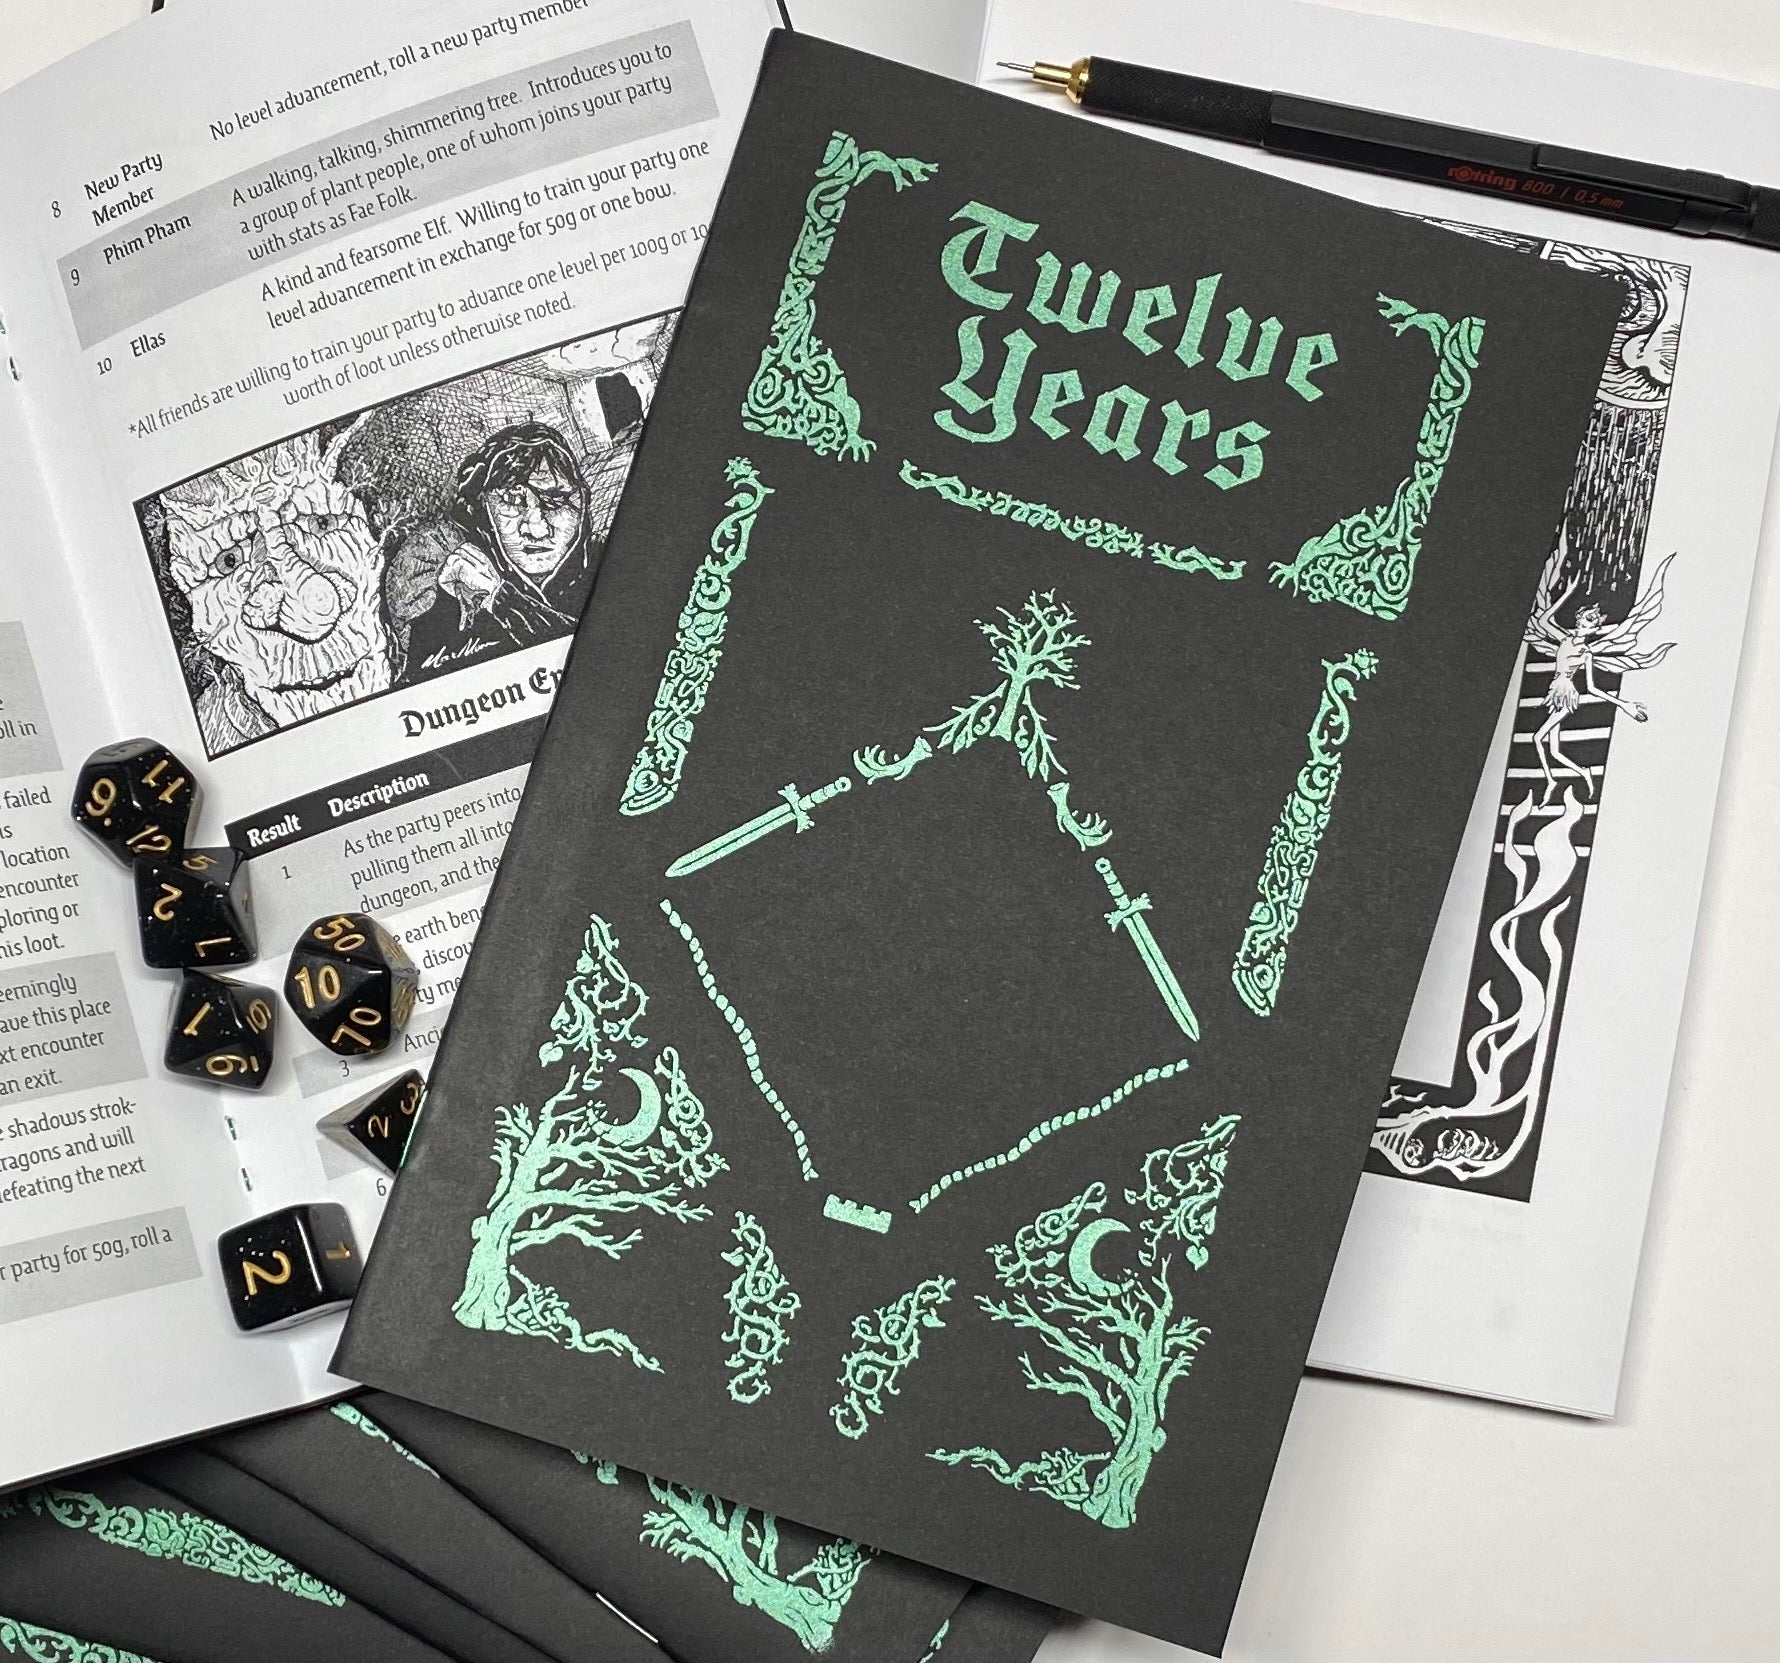 Twelve Years Roleplaying Game 4th Edition + PDF - Exalted Funeral